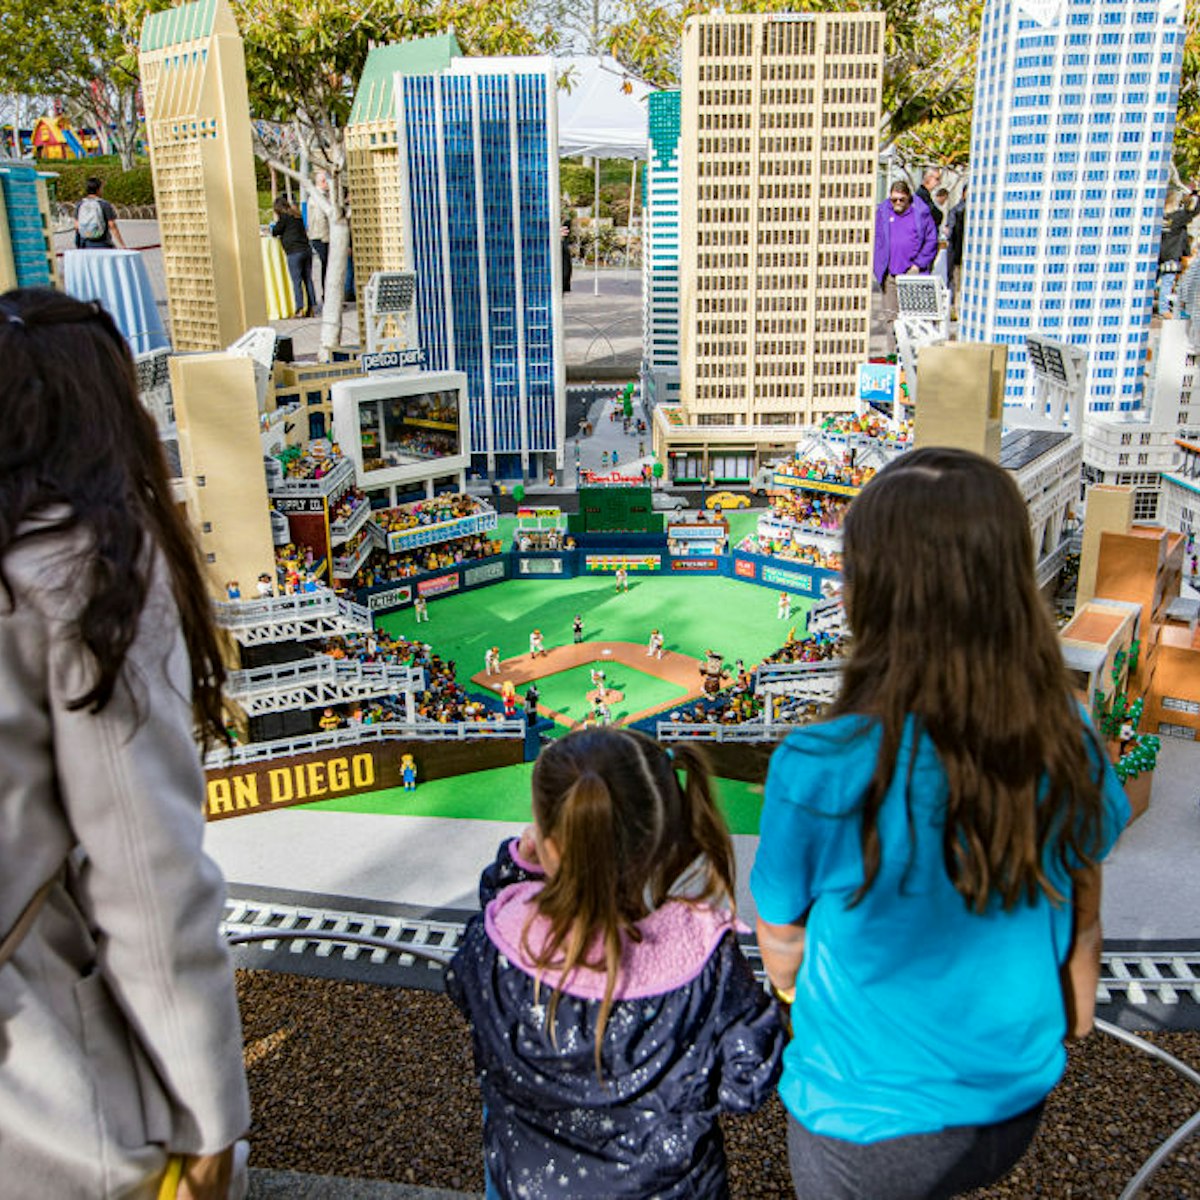 CARLSBAD, CALIFORNIA - MARCH 23: Visitors check out a miniature Petco Park made of LEGO brick at the Grand Opening of MINILAND San Diego at LEGOLAND California on March 23, 2023 in Carlsbad, California. (Photo by Daniel Knighton/Getty Images)
1475630417
theme park